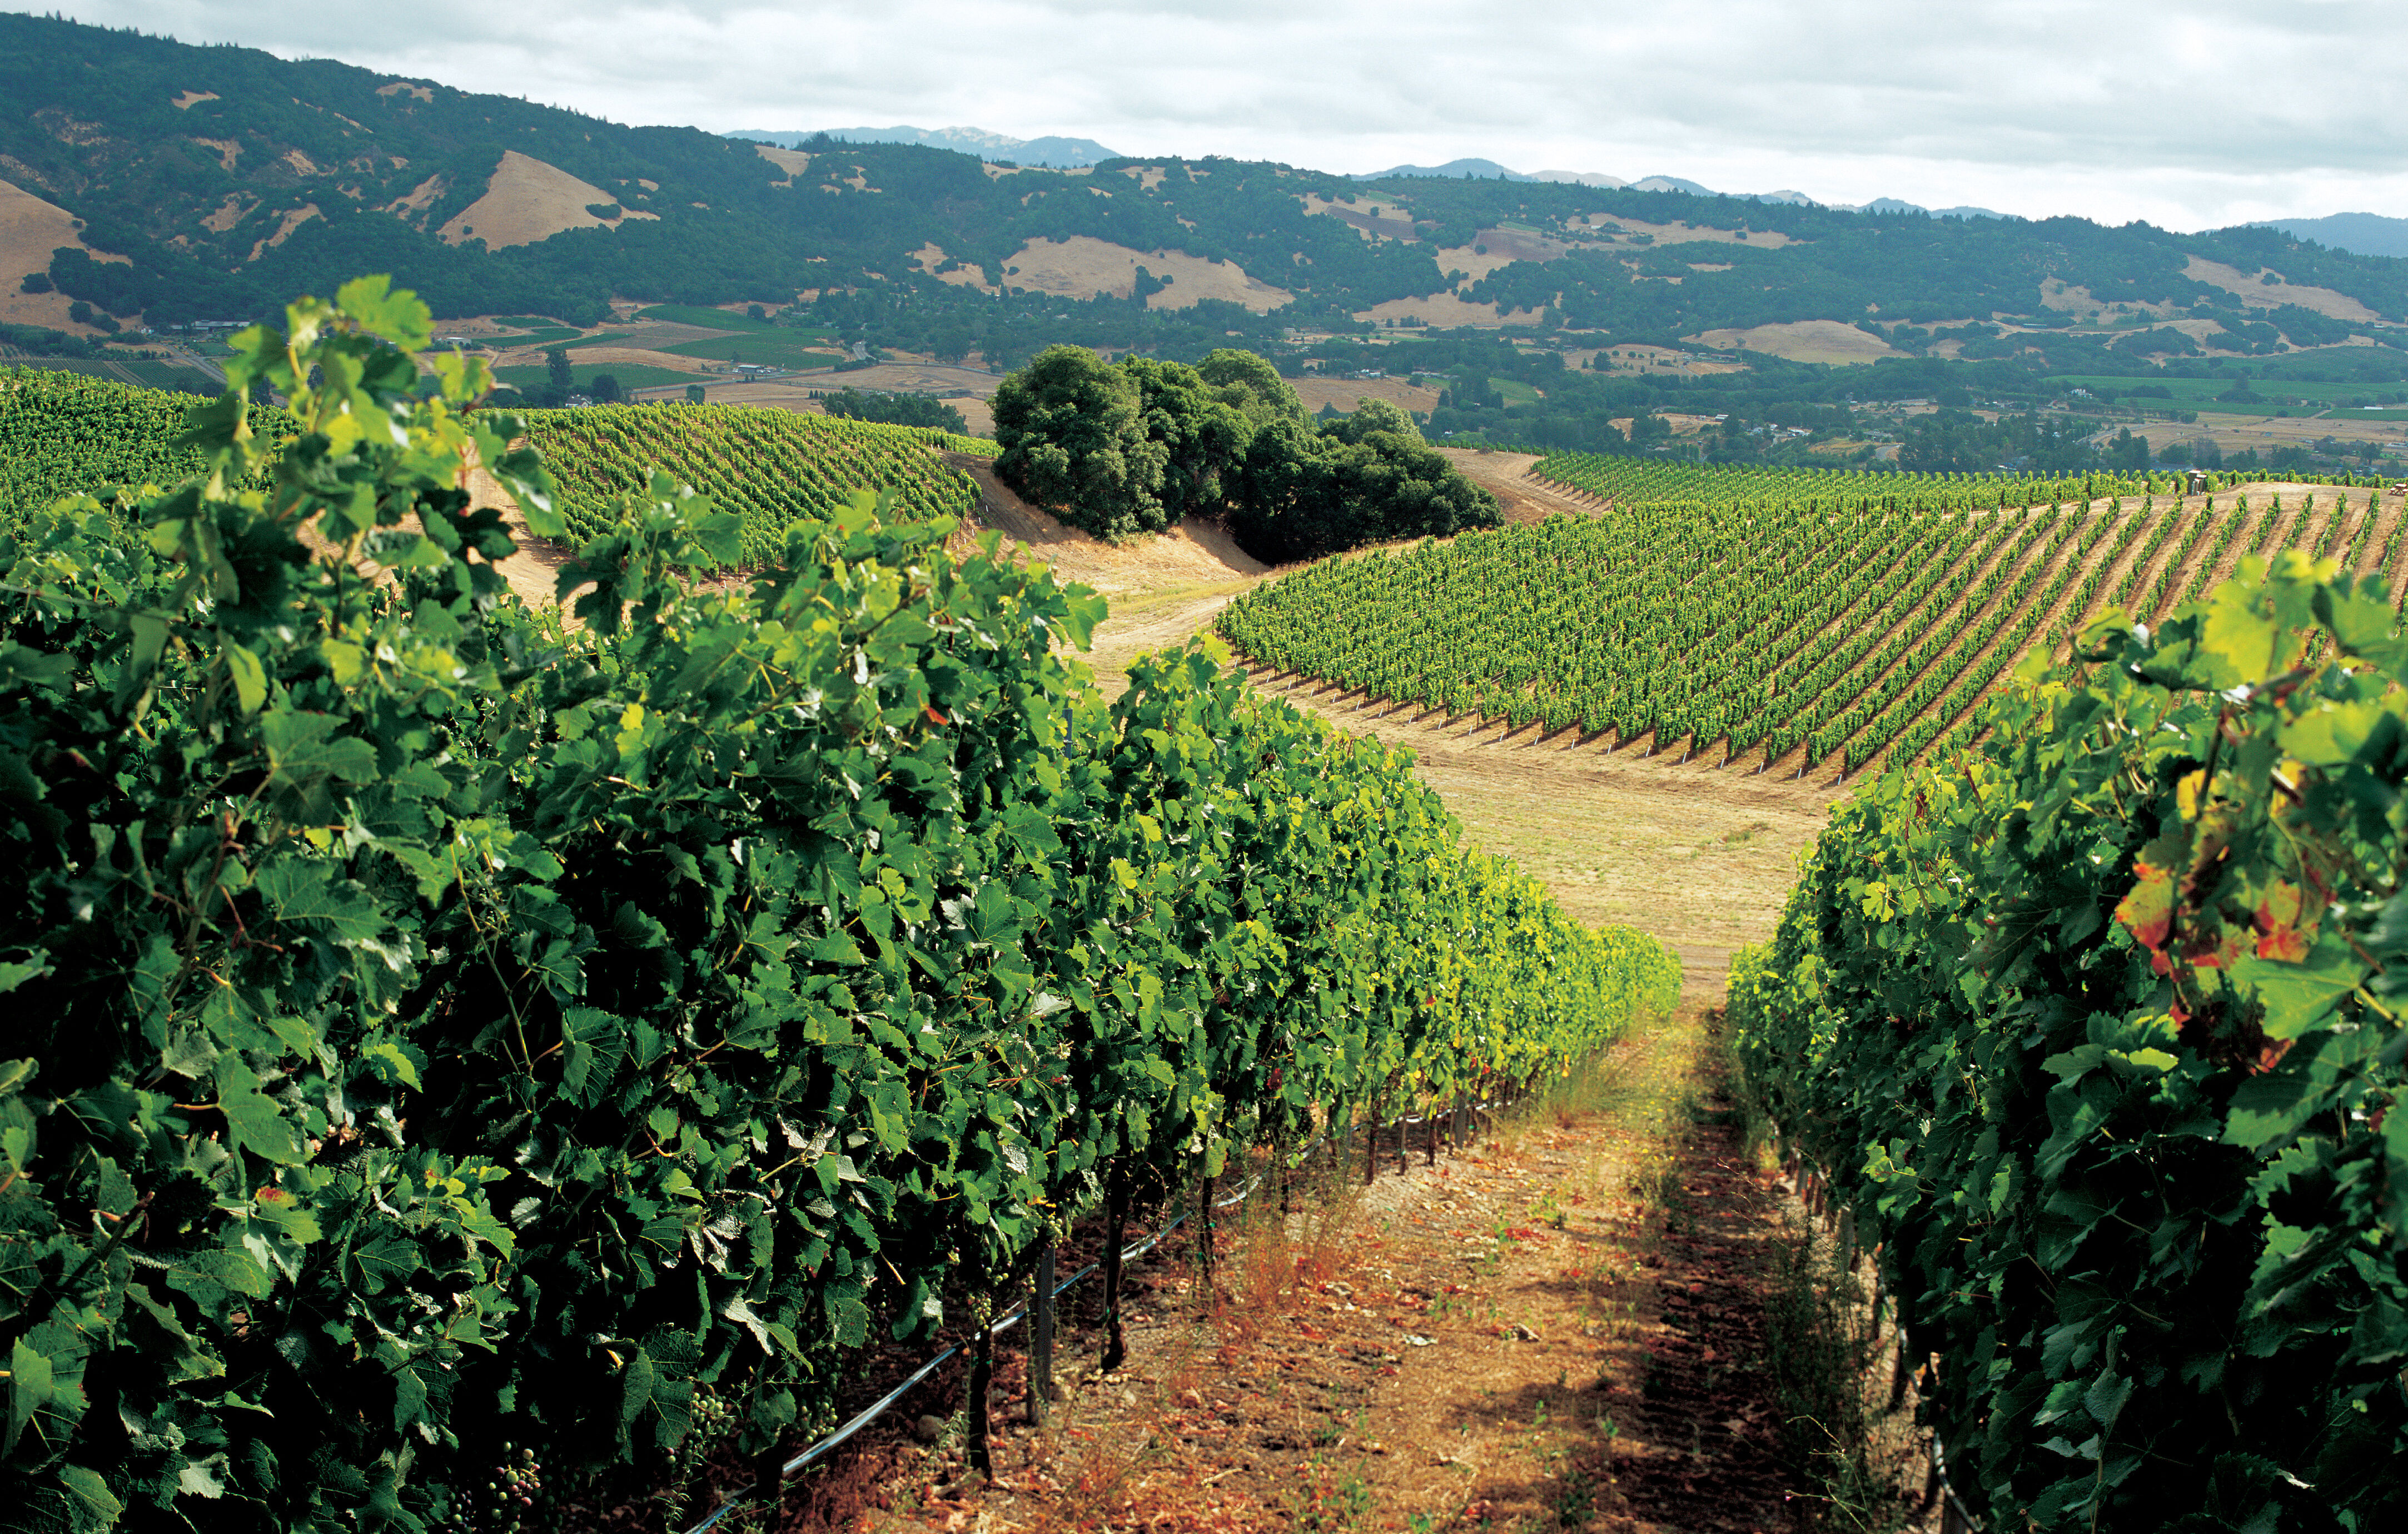 This estate vineyard is located 1400' above Santa Rosa at the very top of Taylor Mountain.